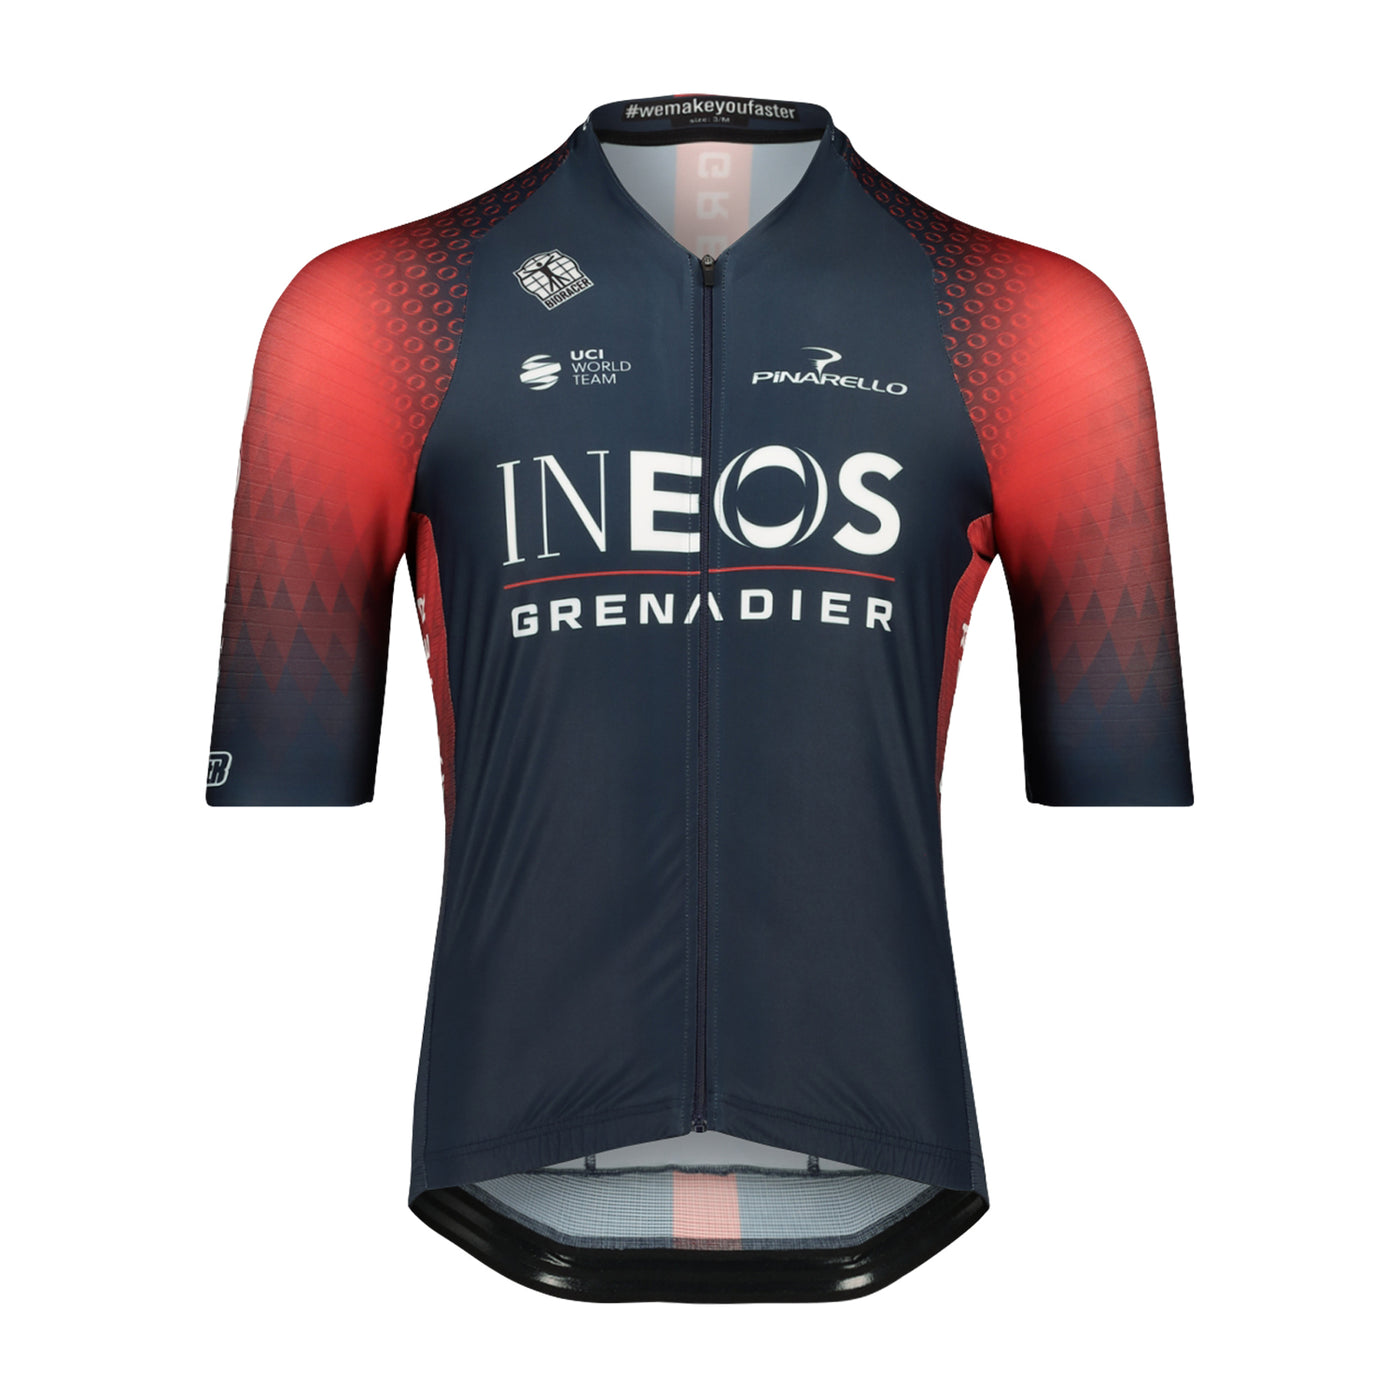 INEOS - GRENADIERS ICON JERSEY